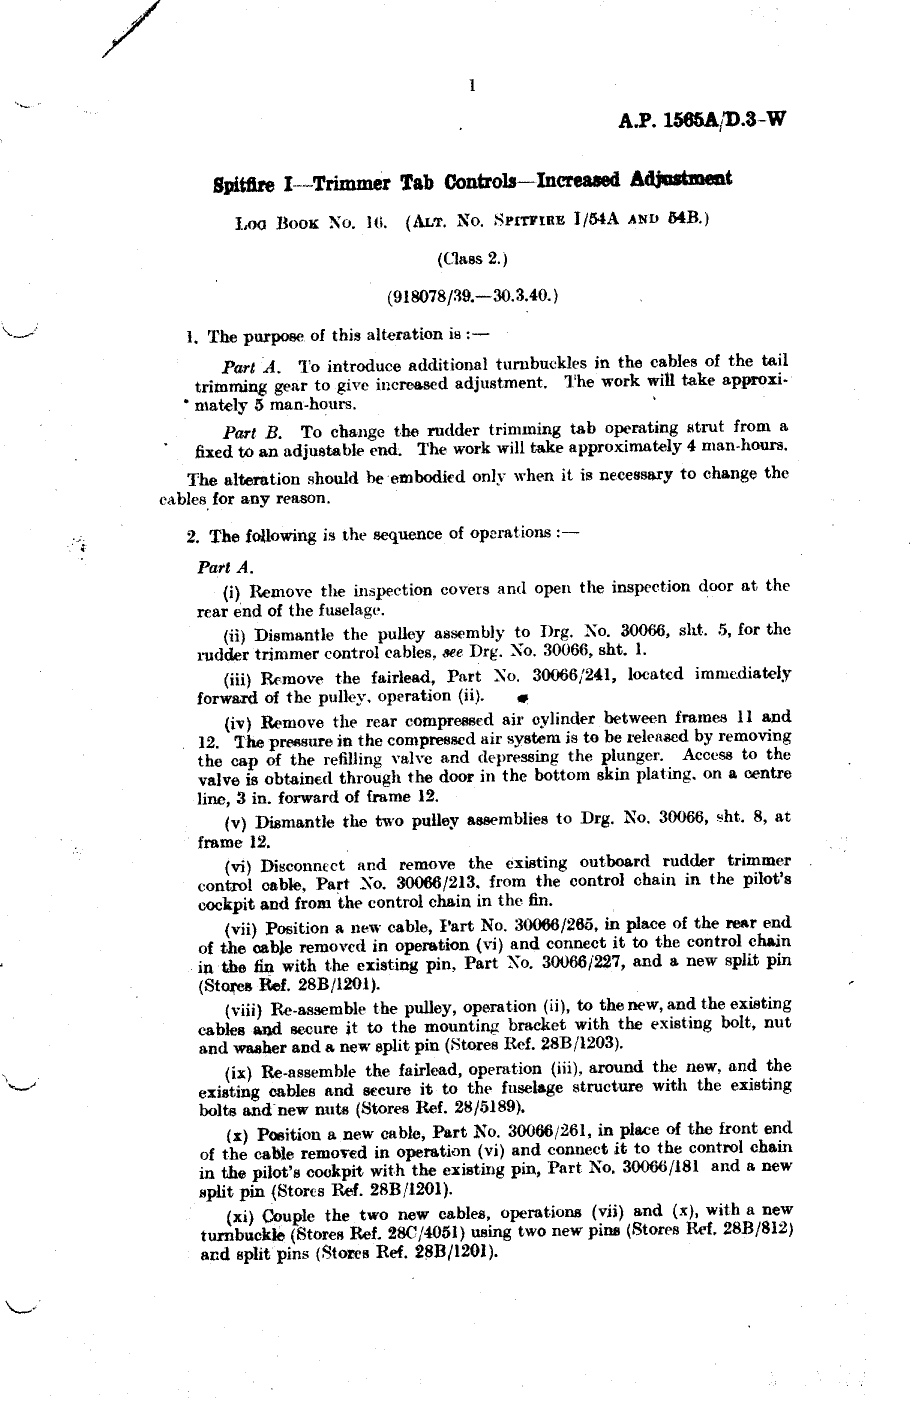 Sample page 1 from AirCorps Library document: Spitfire I Trimmer Tab Controls Increased Adjustment